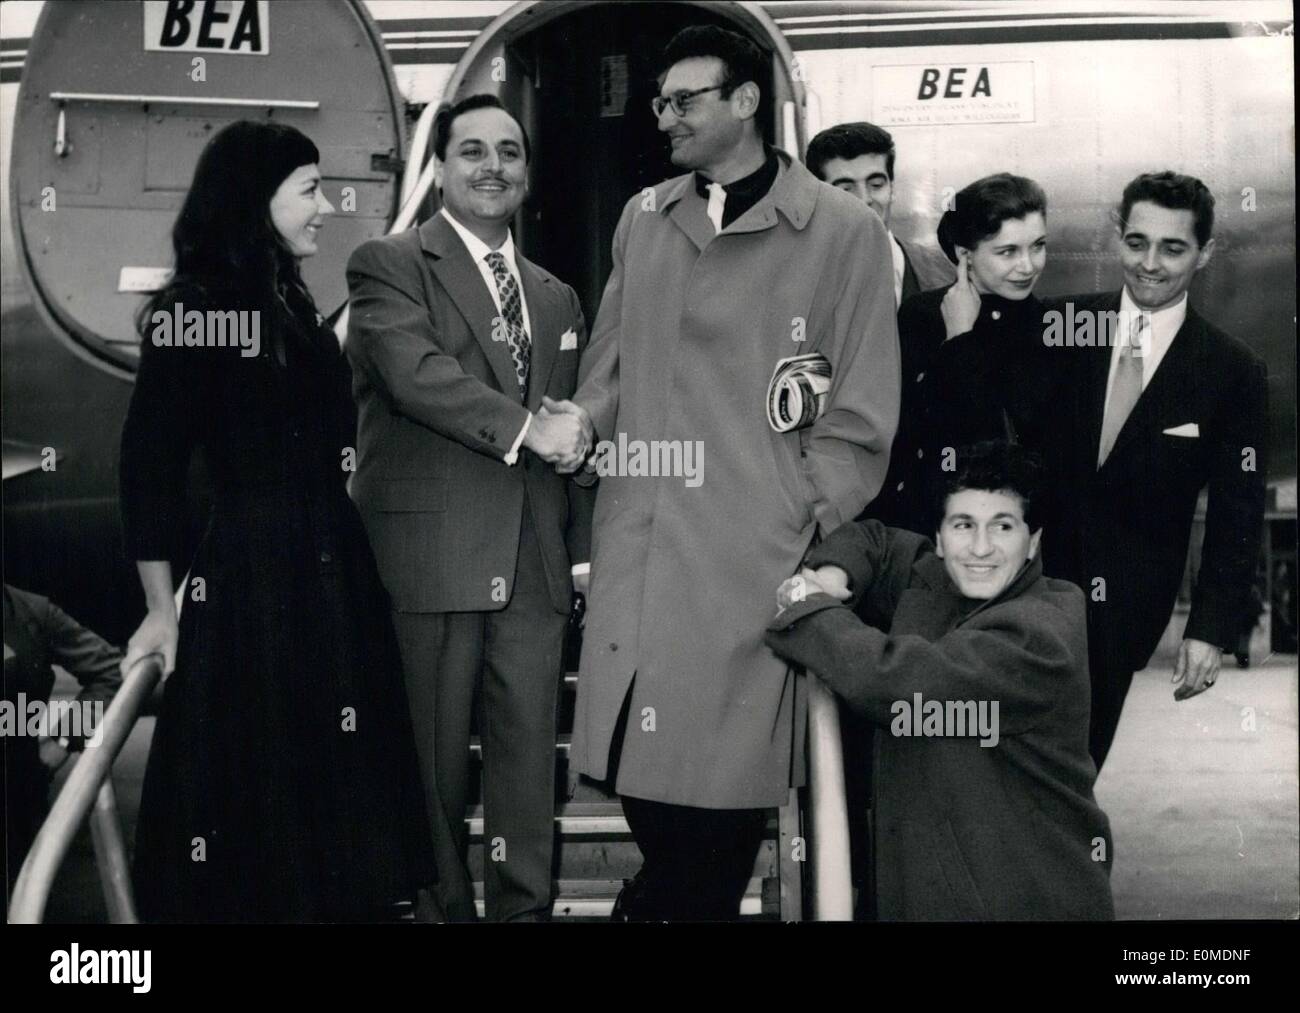 Oct. 15, 1954 - The most well-paid singer in the world Frankie Laine is in Paris for 14 hours. He will be doing two shows at the Alhambra. The artists who created his songs in France welcomed him at the Bourget airport. Hubert Giraud, Annie Rouvre, and Fred Leclair are in the back. Mouloudji is squatting beside the railing. Stock Photo